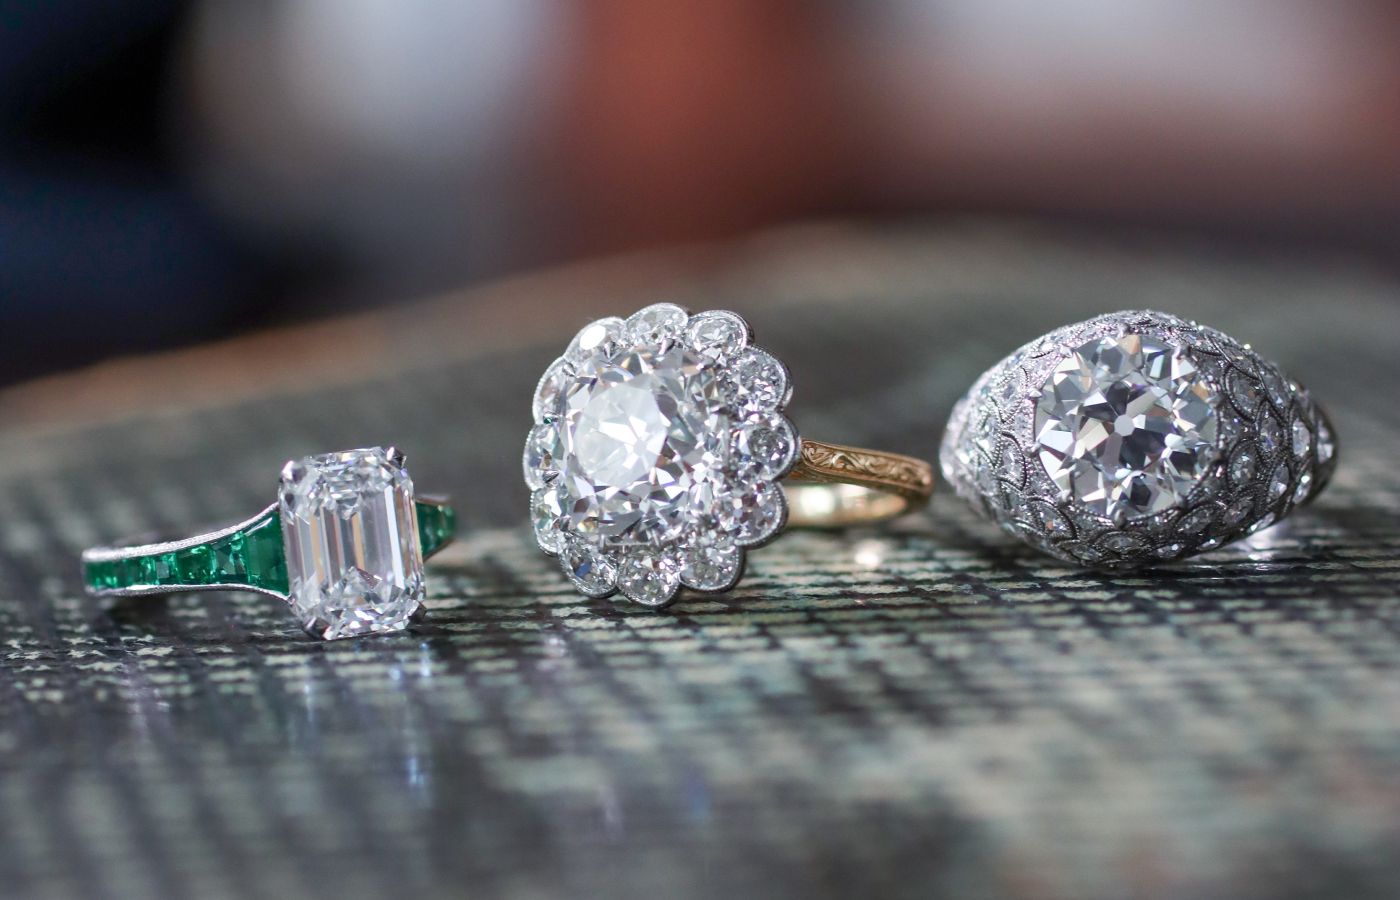 A selection of Hancocks antique rings including a 2.85-ct Emerald-cut diamond and emerald ring, a 5.08-ct Old Mine Cushion-cut diamond Cluster ring and a 3.12-ct Old European Brilliant-cut diamond Bombe Style ring 